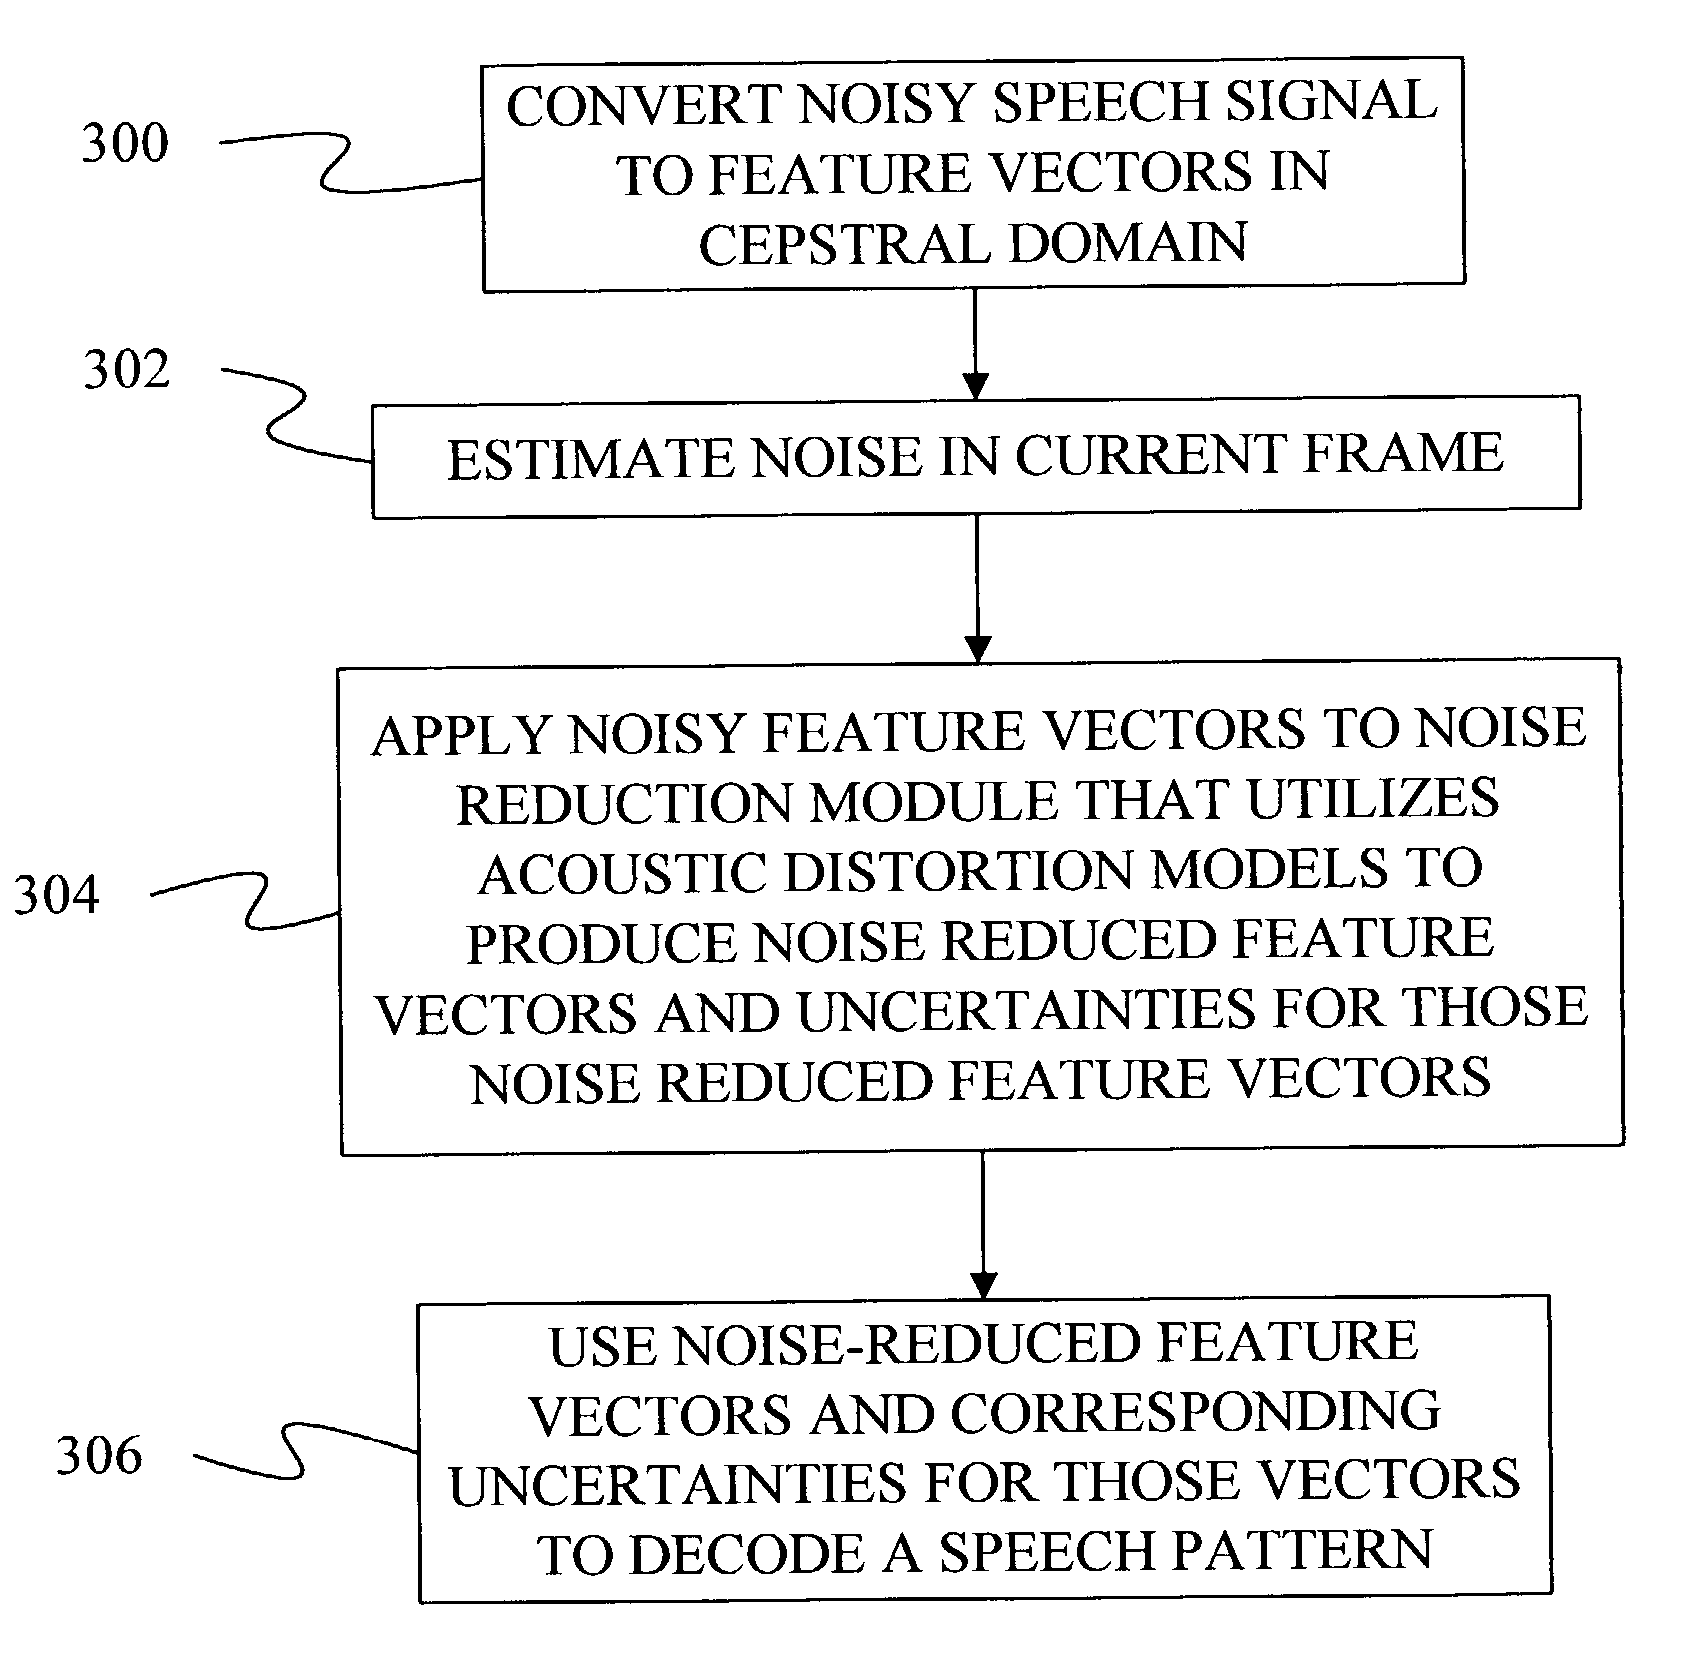 Method of determining uncertainty associated with acoustic distortion-based noise reduction